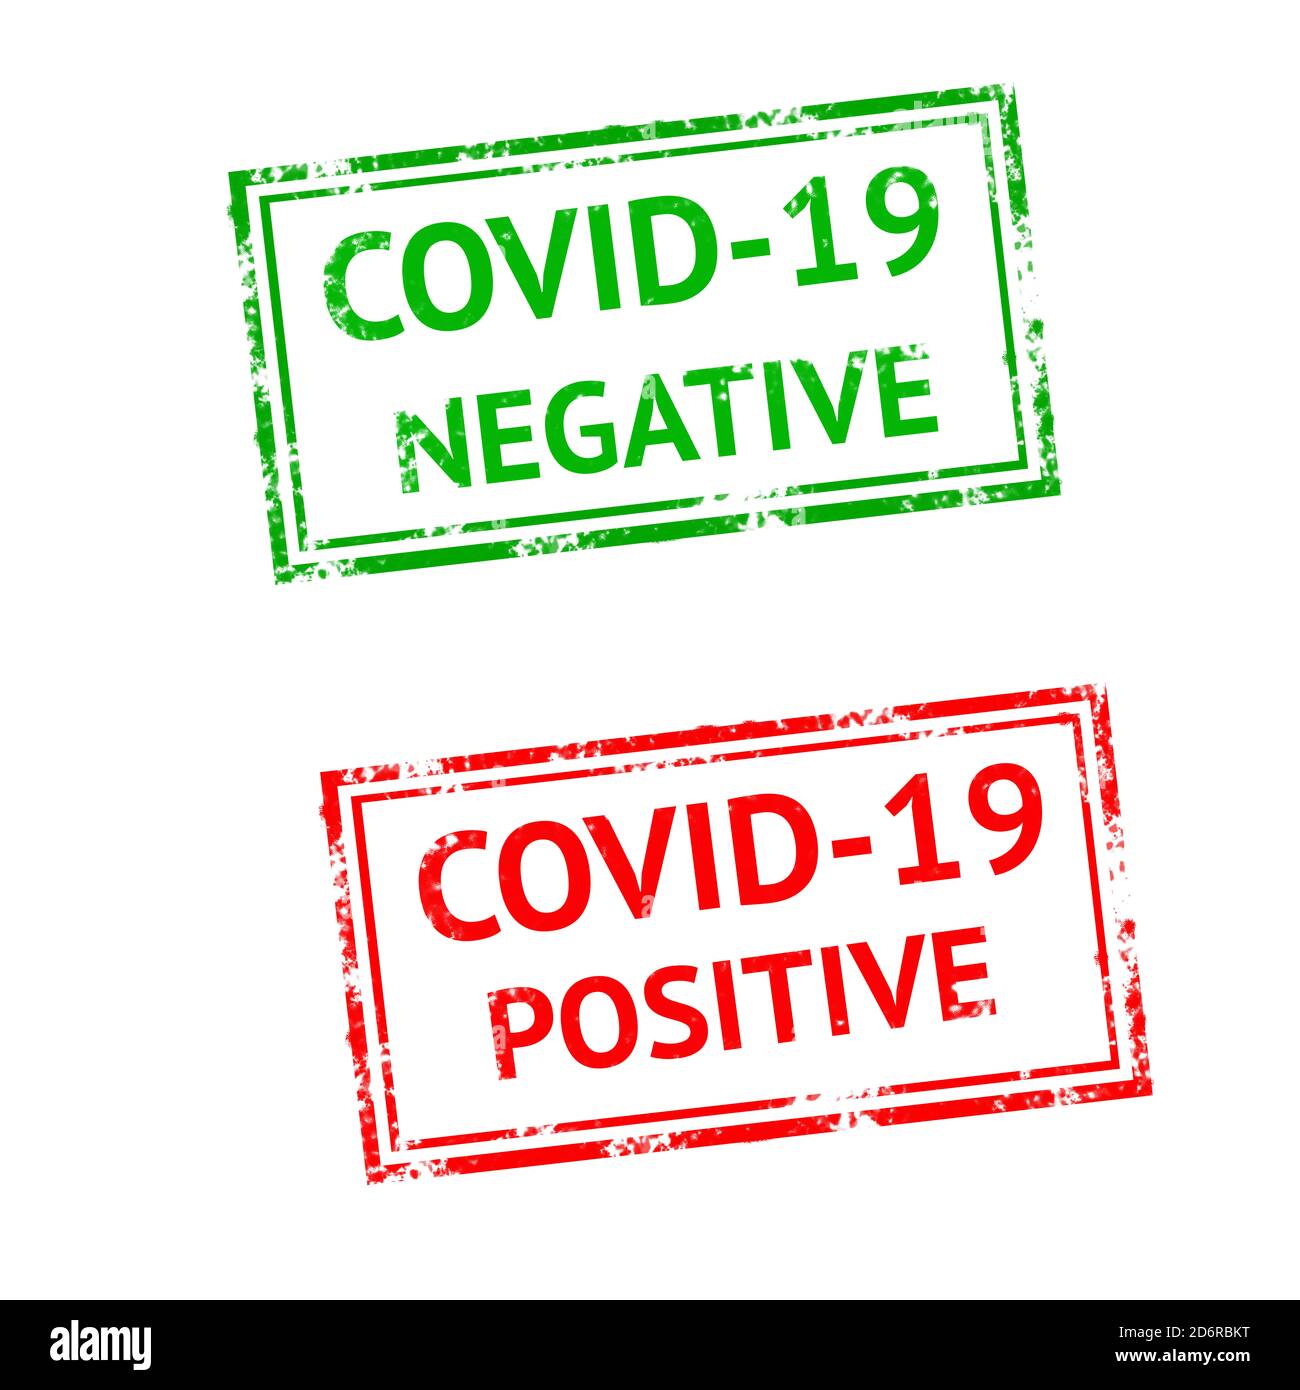 COVID-19 NEGATIVE and POSITIVE text by red and green rubber stamps, concept picture Stock Photo